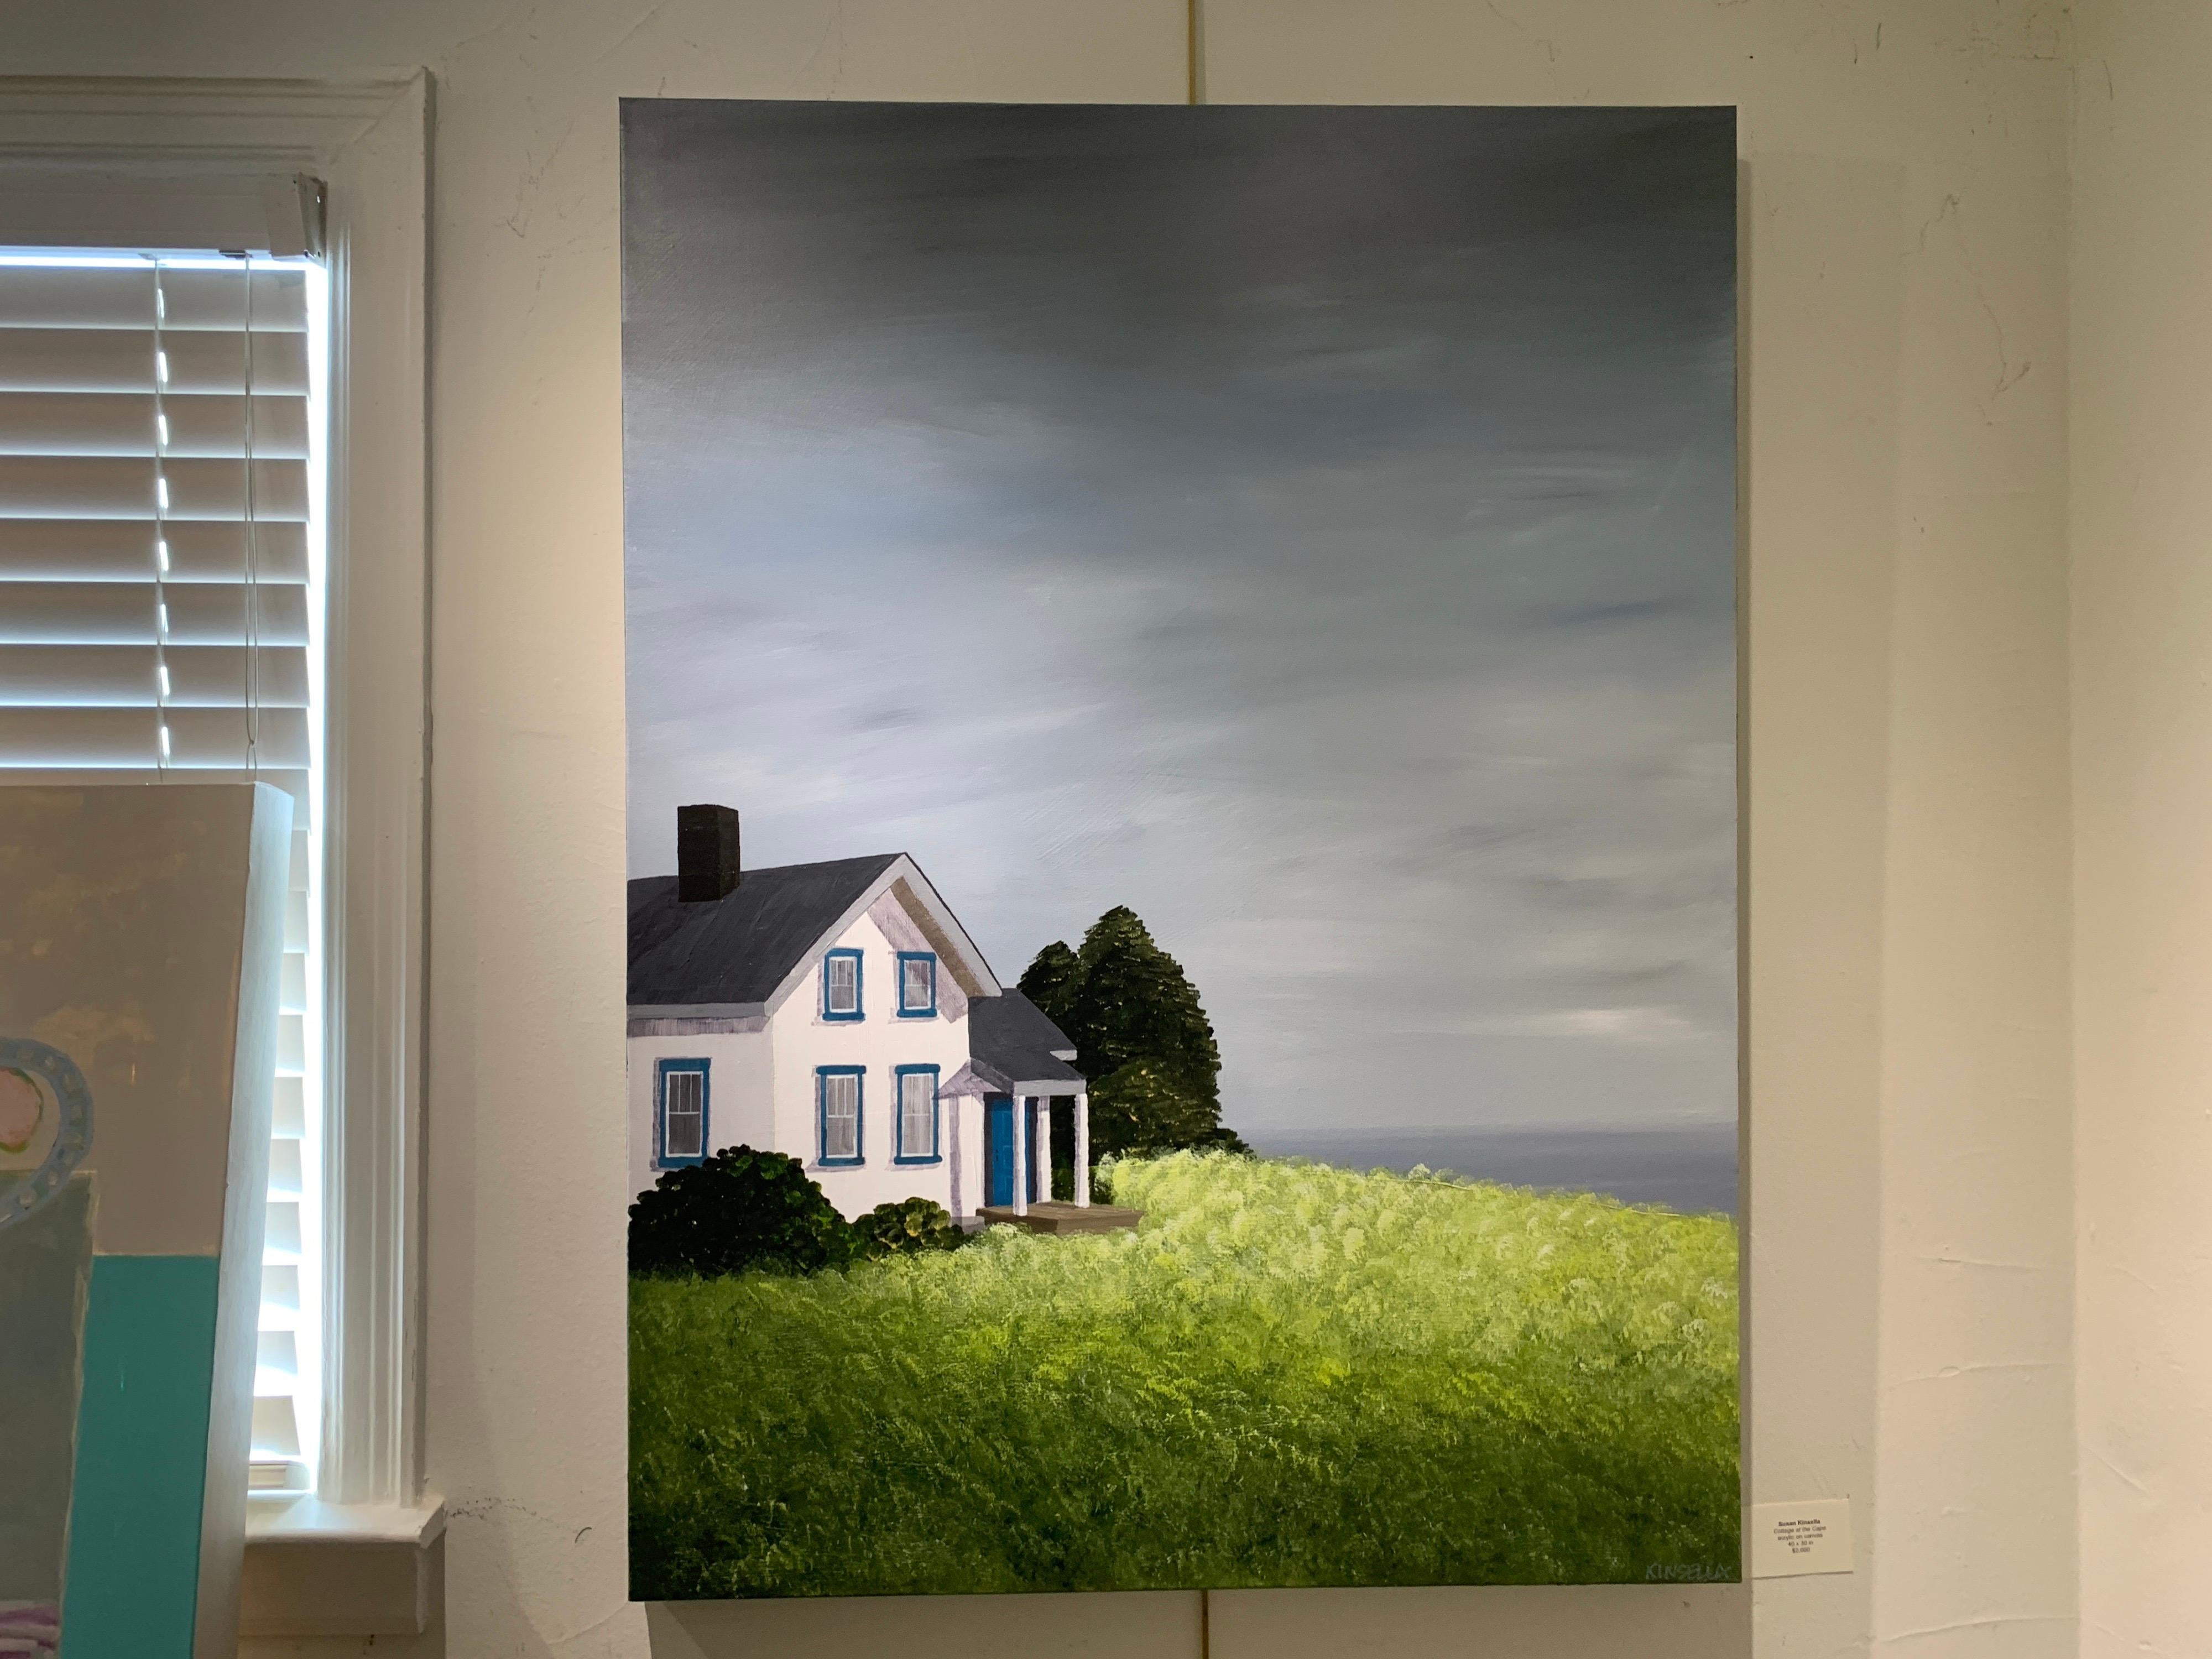 Cottage at the Cape by Susan Kinsella, medium vertical contemporary landscape 2